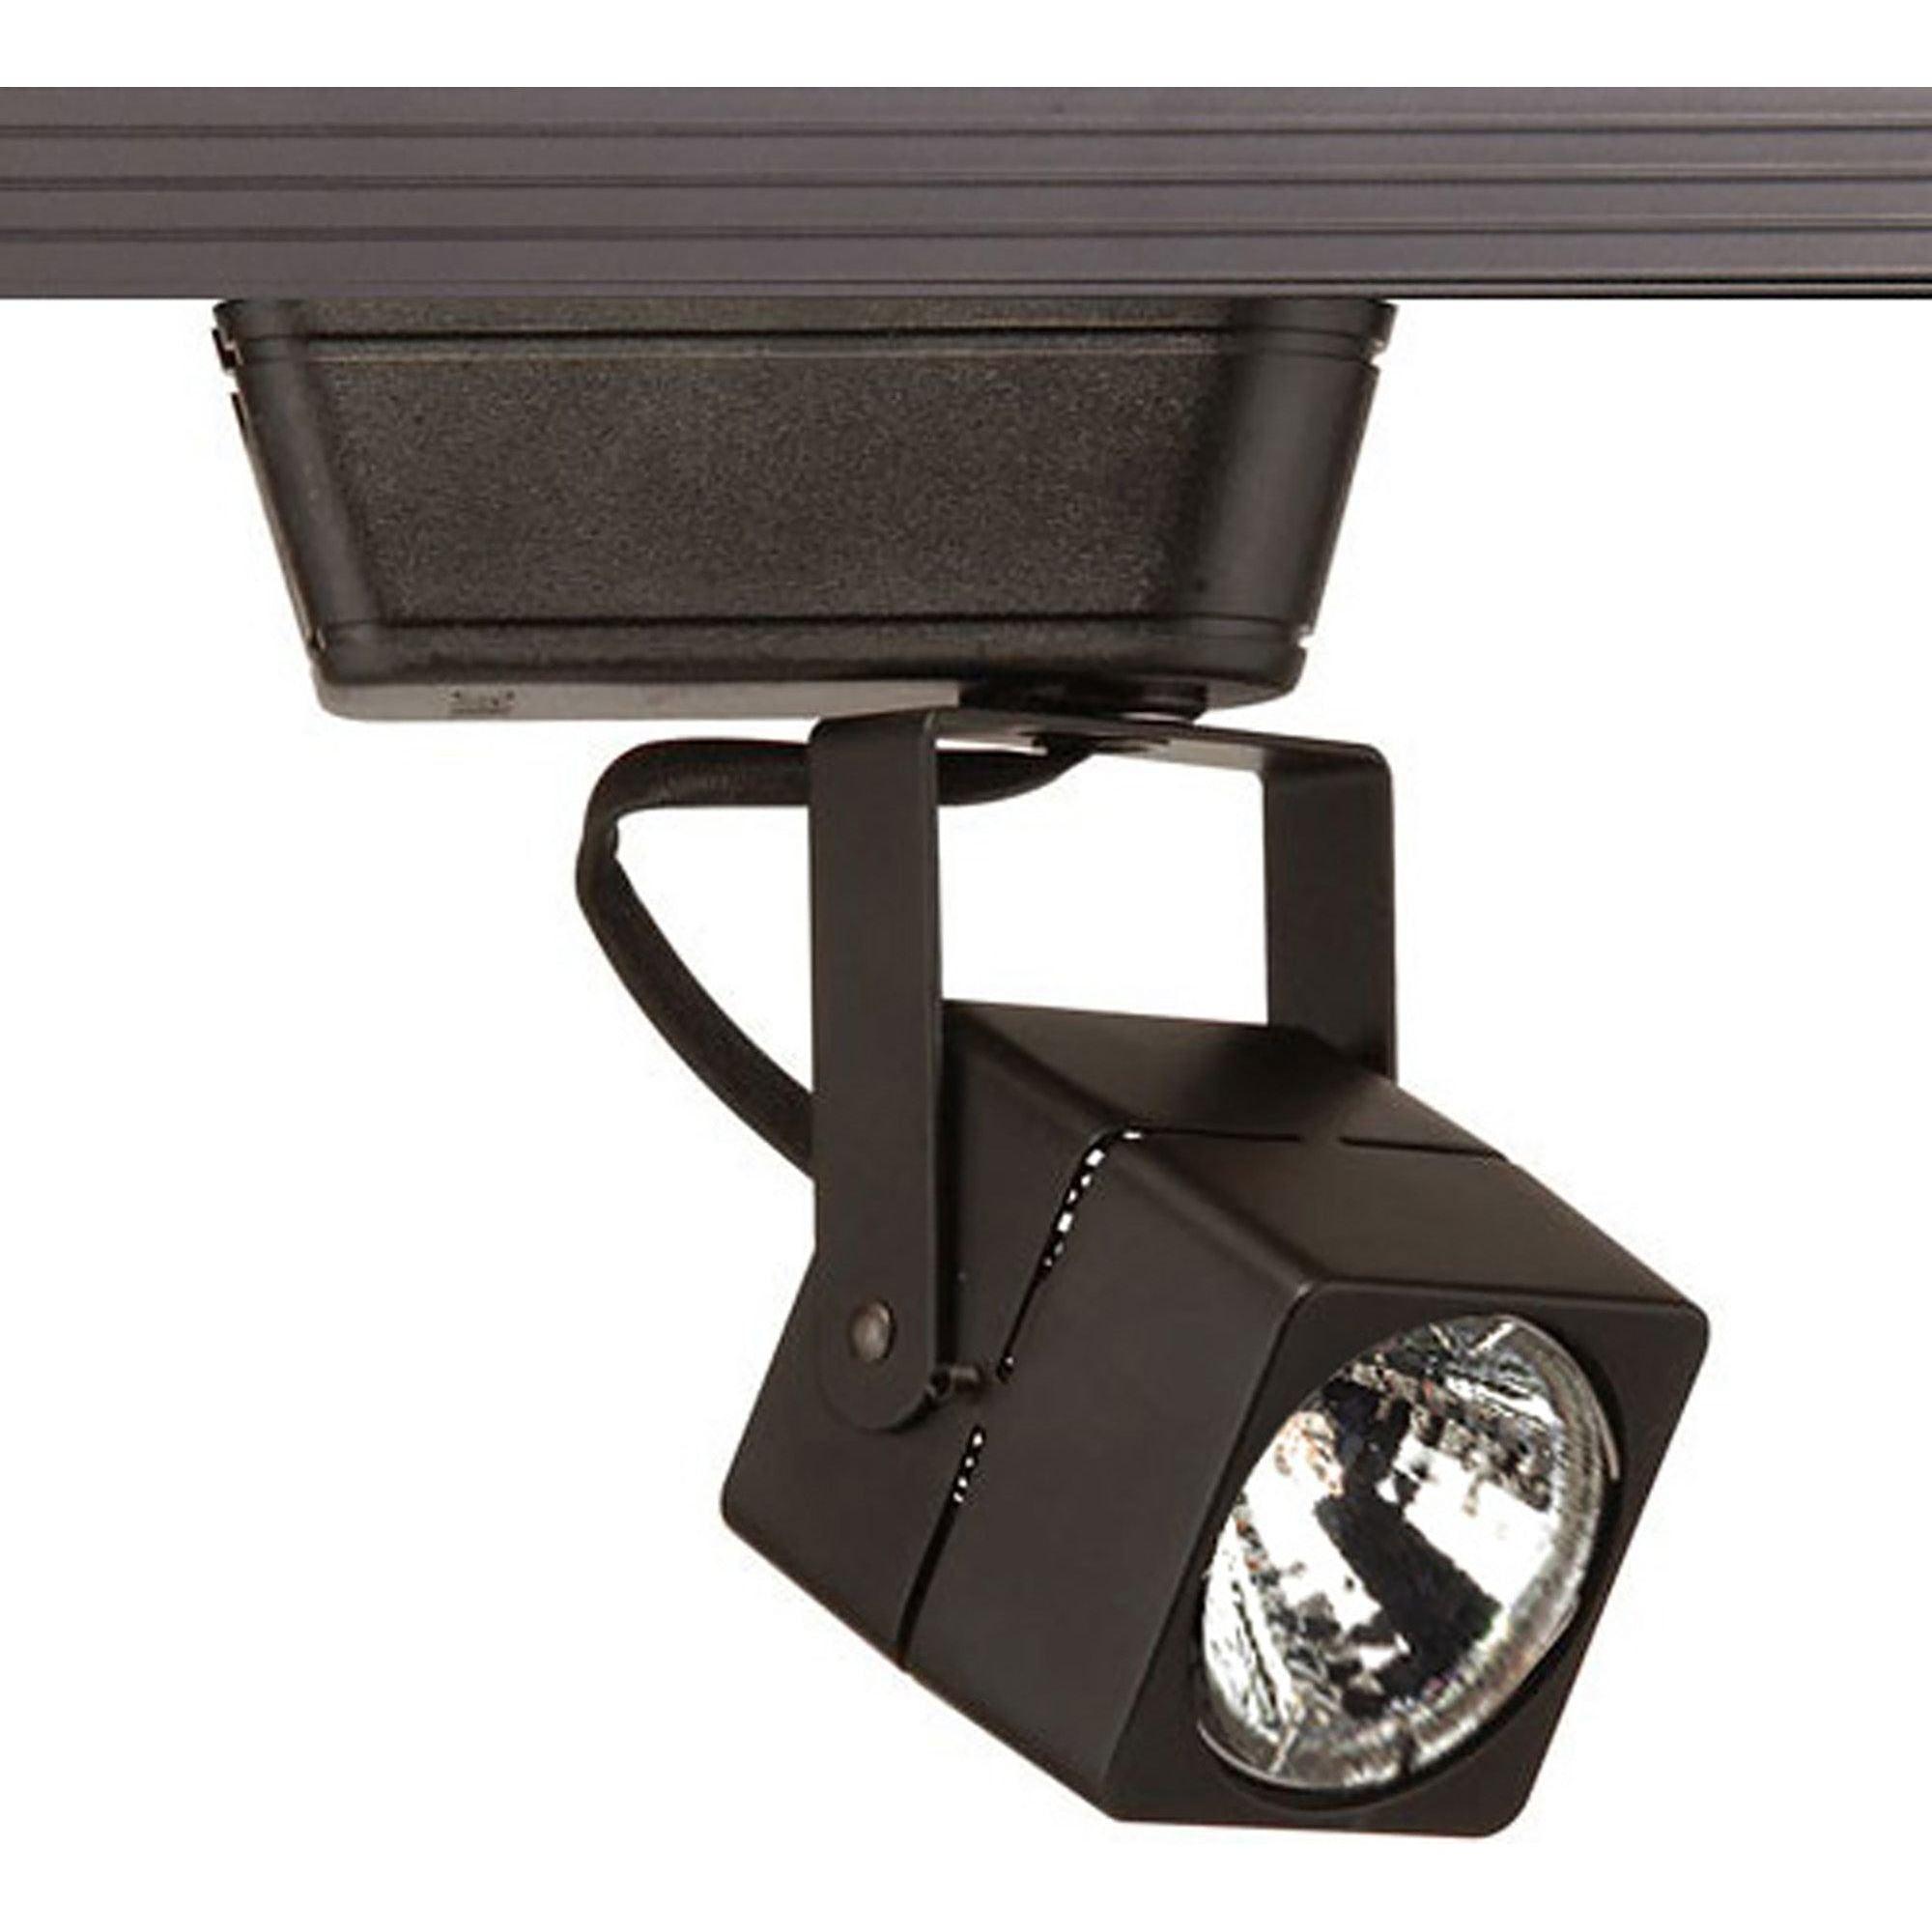 WAC Lighting - HT-802 Low Voltage Track Head for L Track - Lights Canada